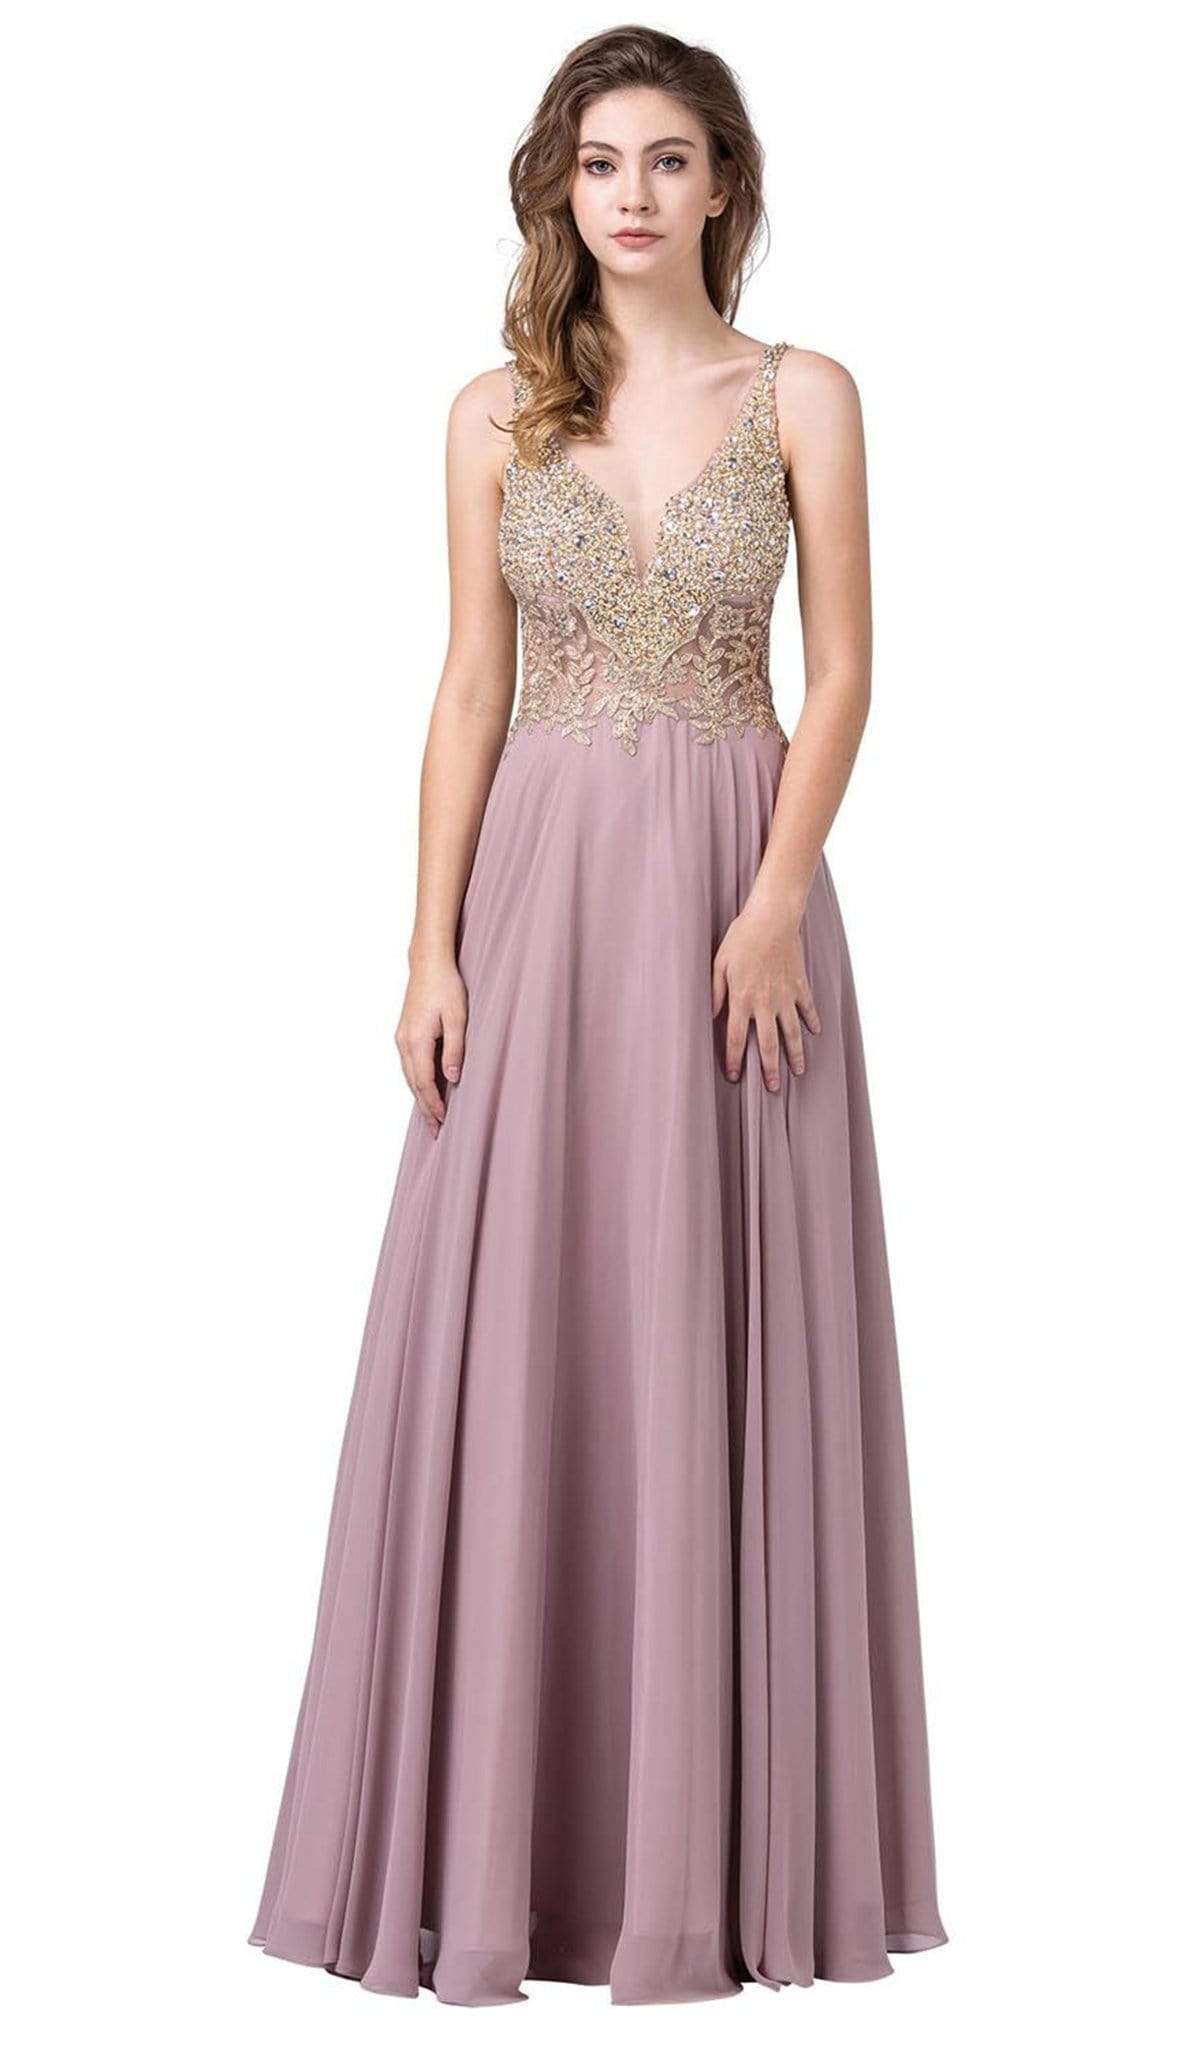 Dancing Queen - 2494 Jewel Encrusted Bodice A-Line Chiffon Gown
